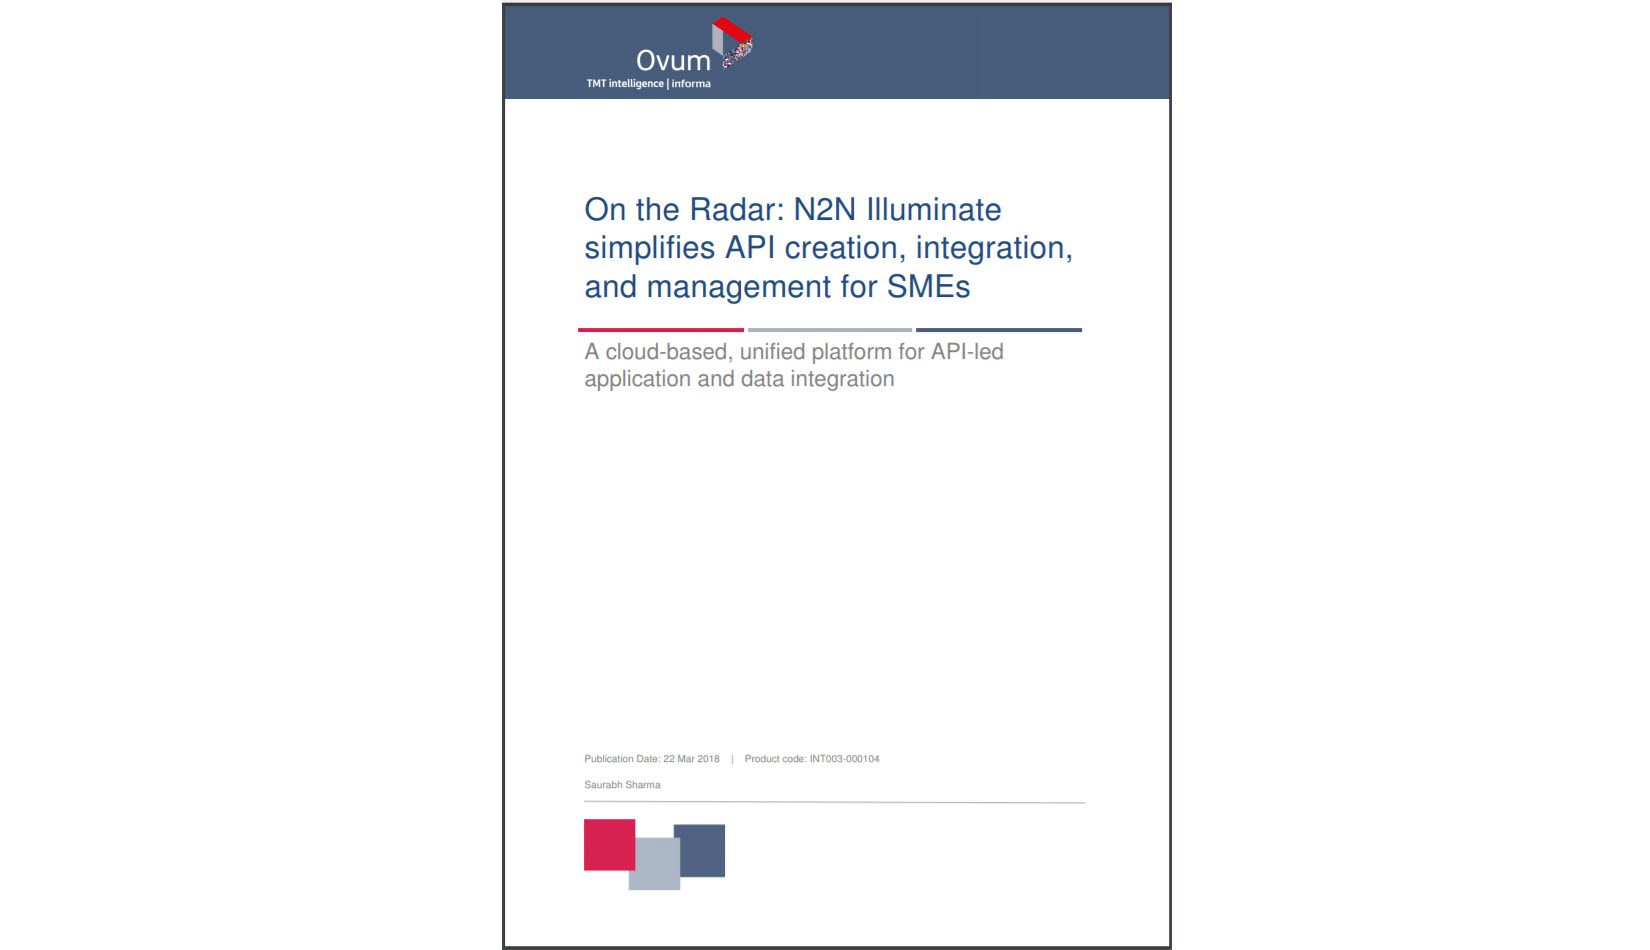 Leading Analyst Firm Recognizes N2N’s Illuminate Platform for rapid API creation and API management capabilities.